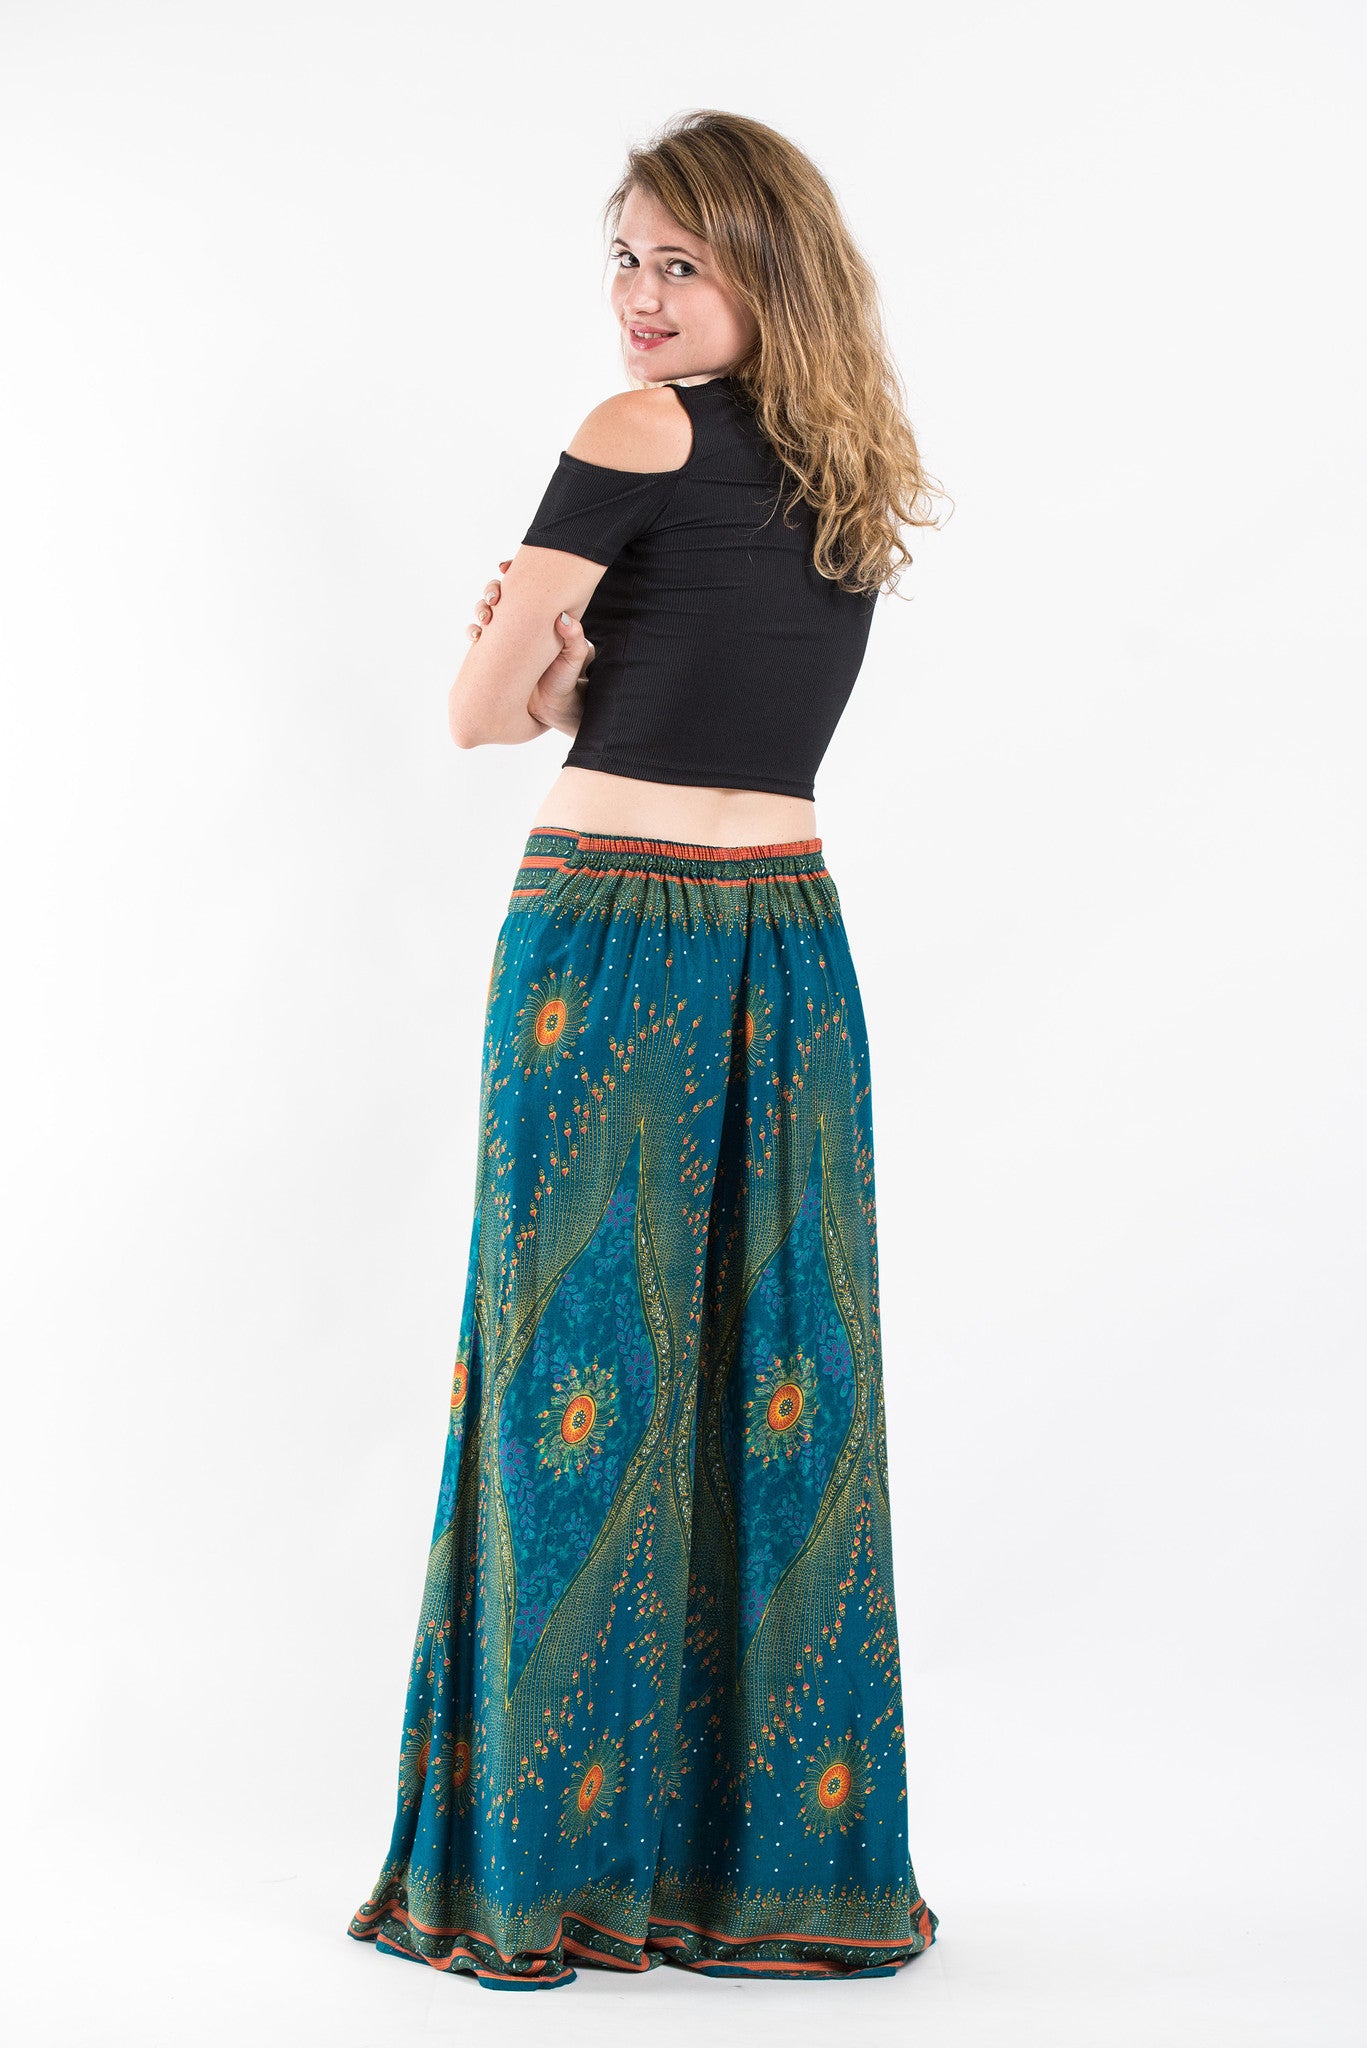 Peacock Eyes Palazzo Style Harem Pants in Turquoise